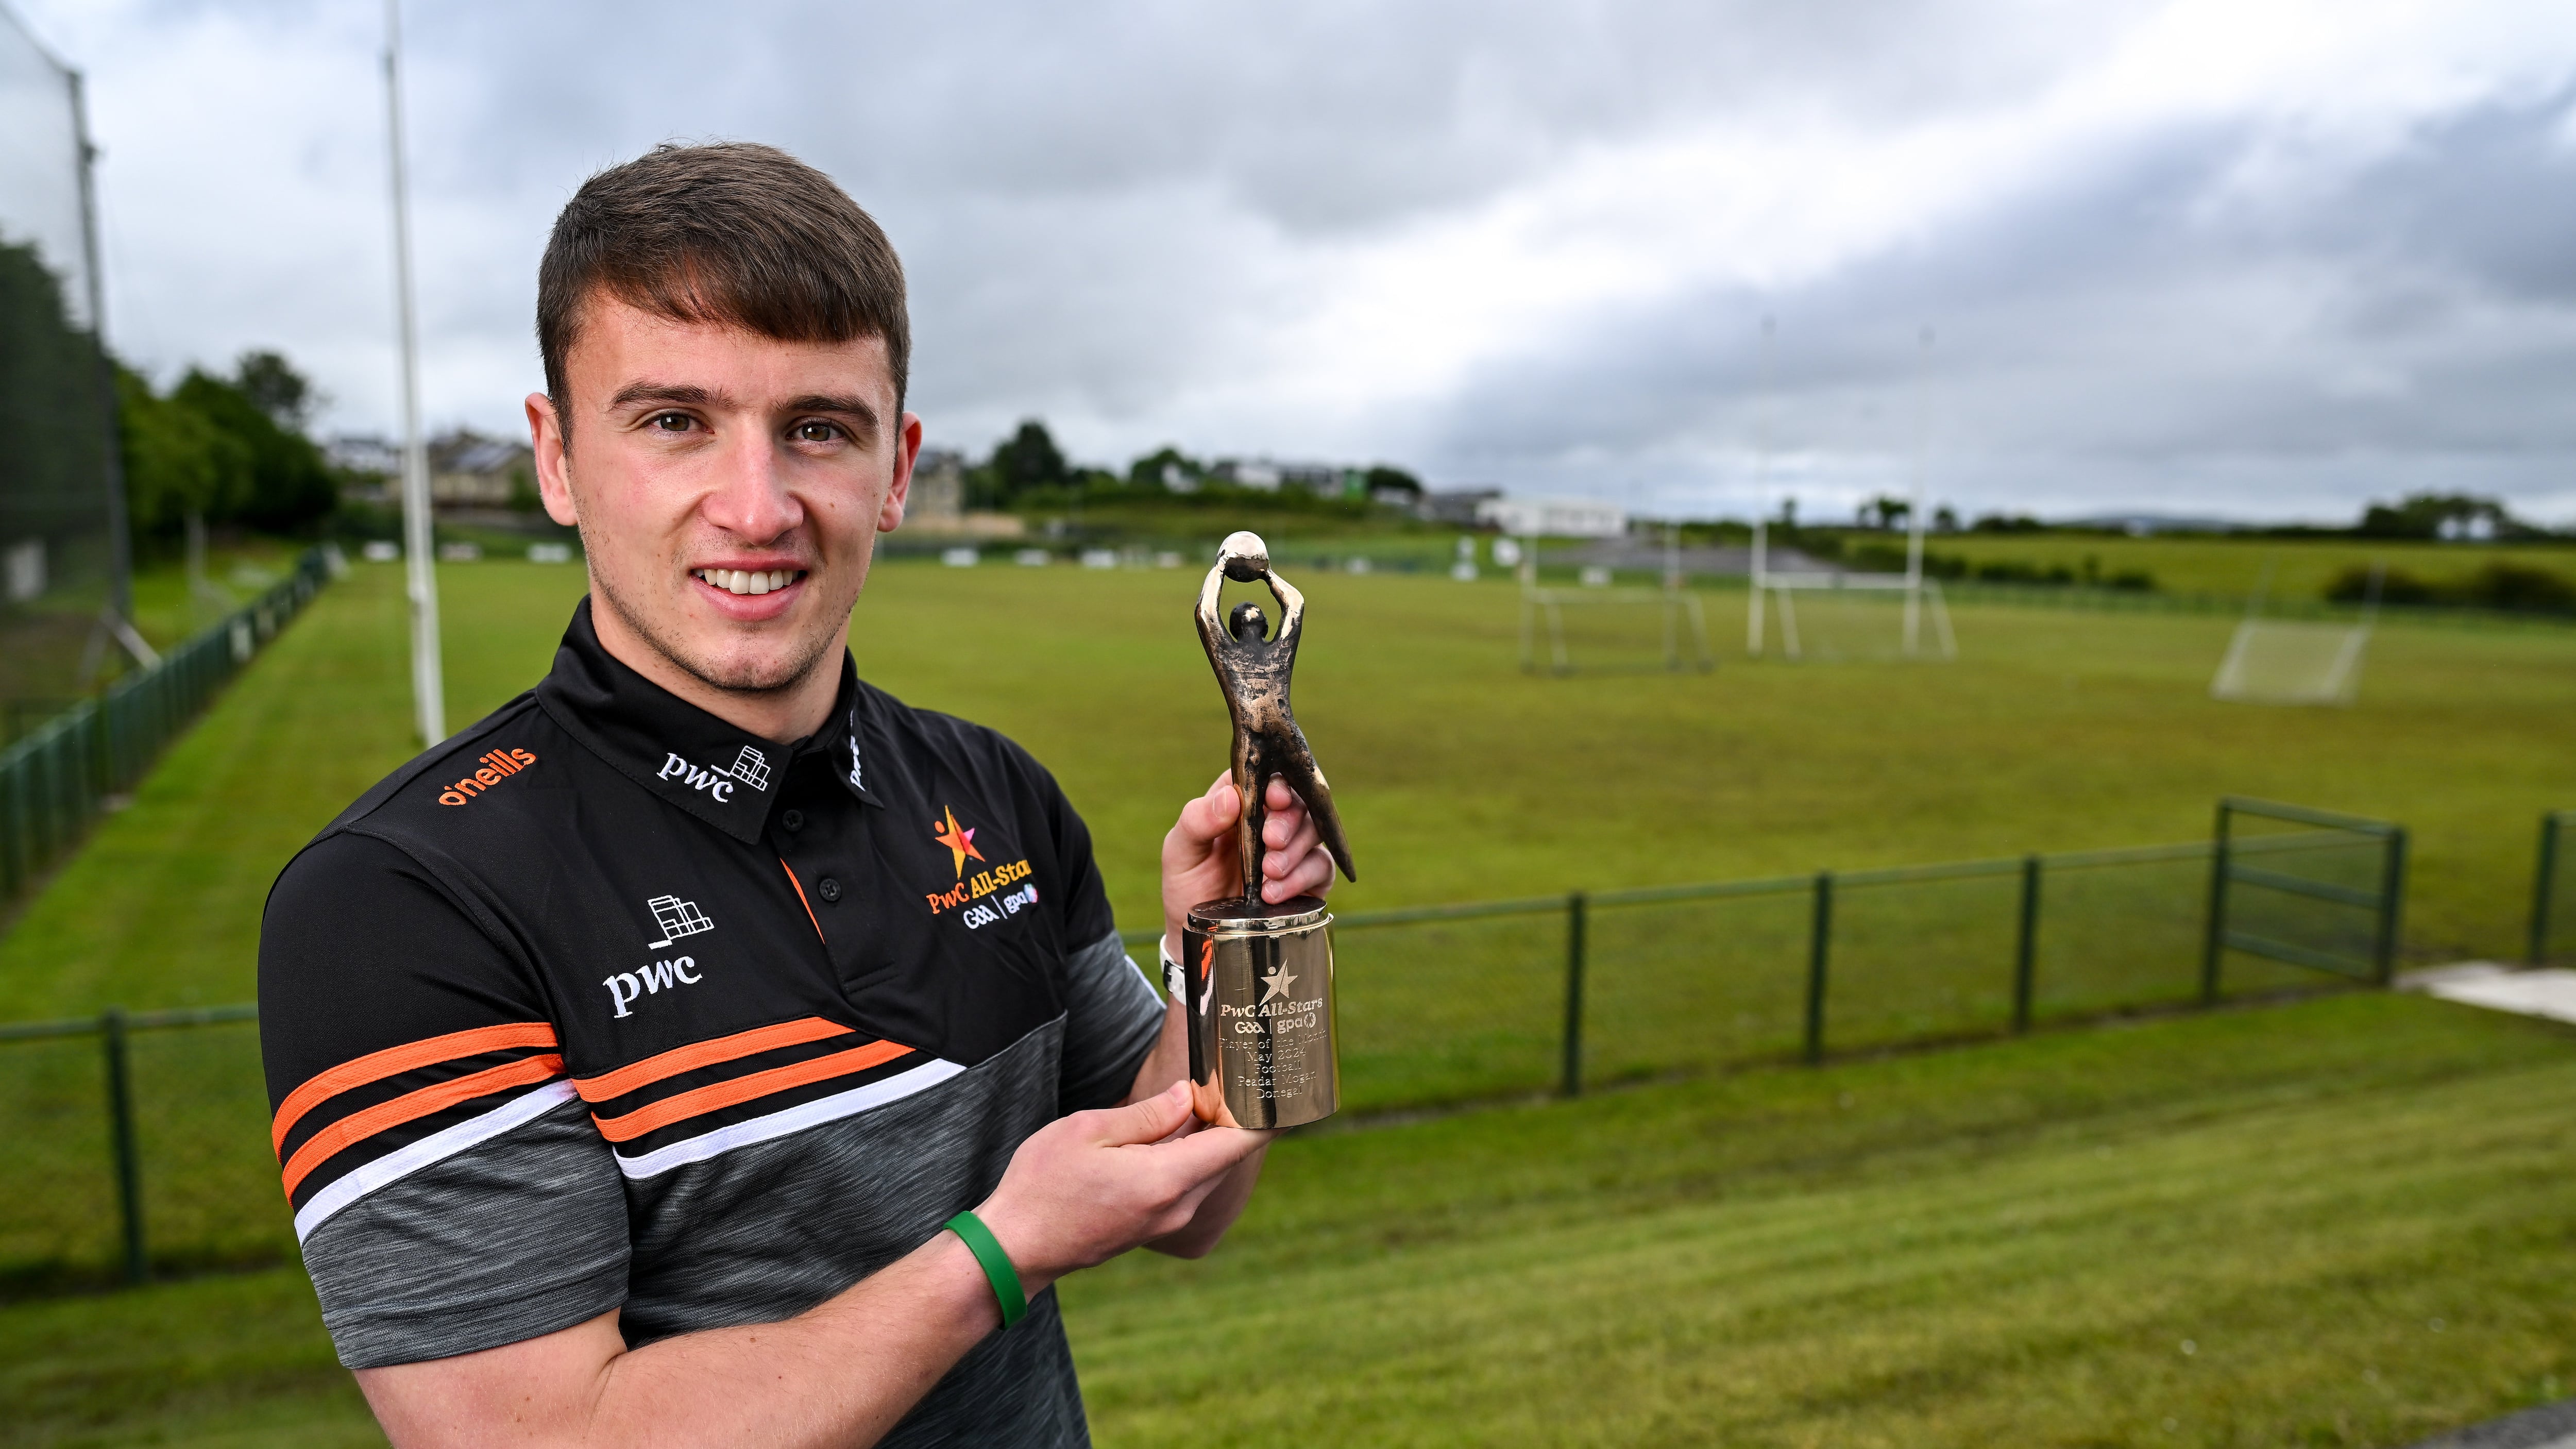 Donegal's Peadar Mogan, pictured at his club St Naul's in Mountcharles, has been named the PwC GAA/GPA player of the month for May. Picture by Sportsfile